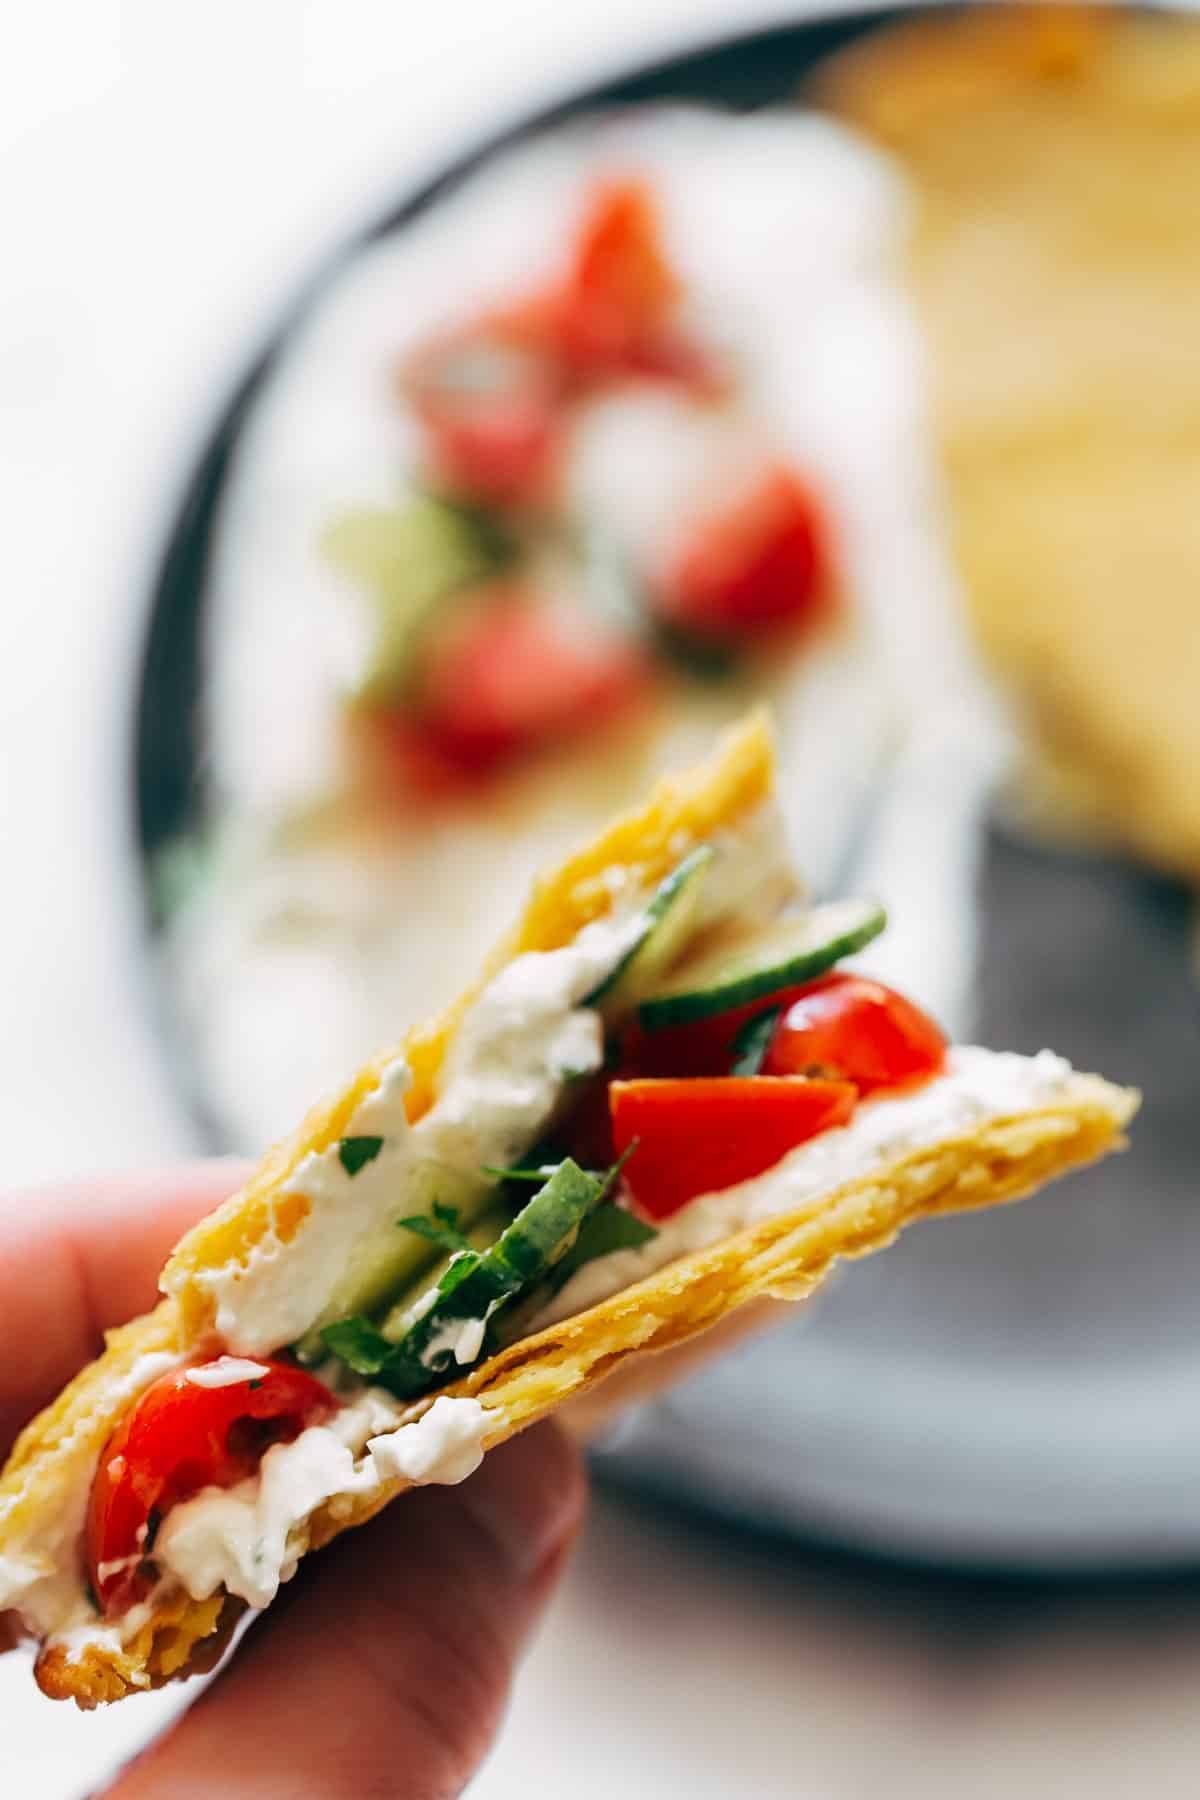 Crispy socca with feta and tomatoes.